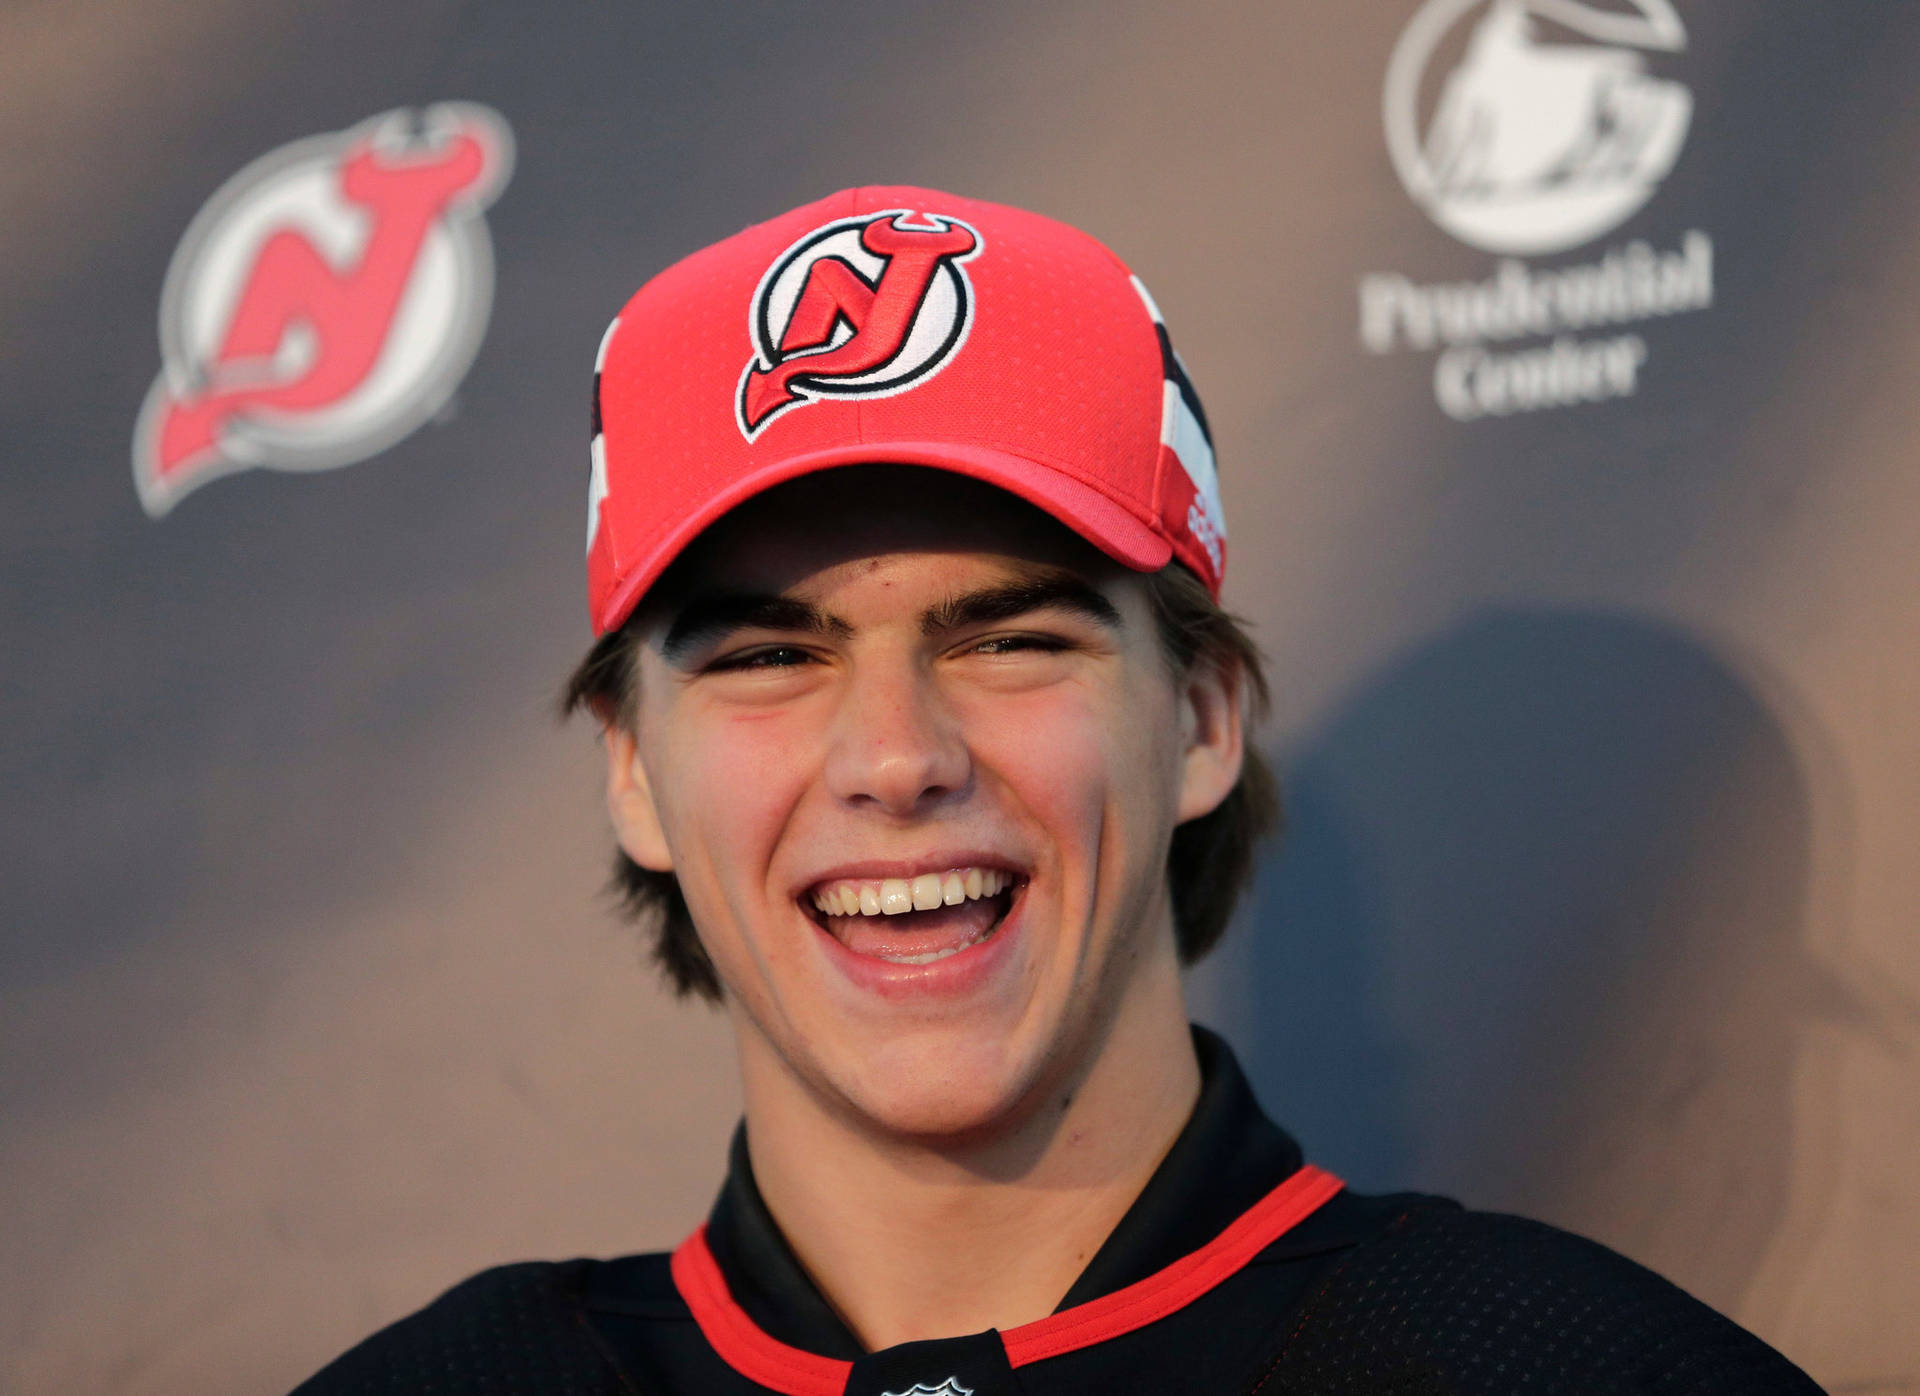 Nico Hischier In Conference Background